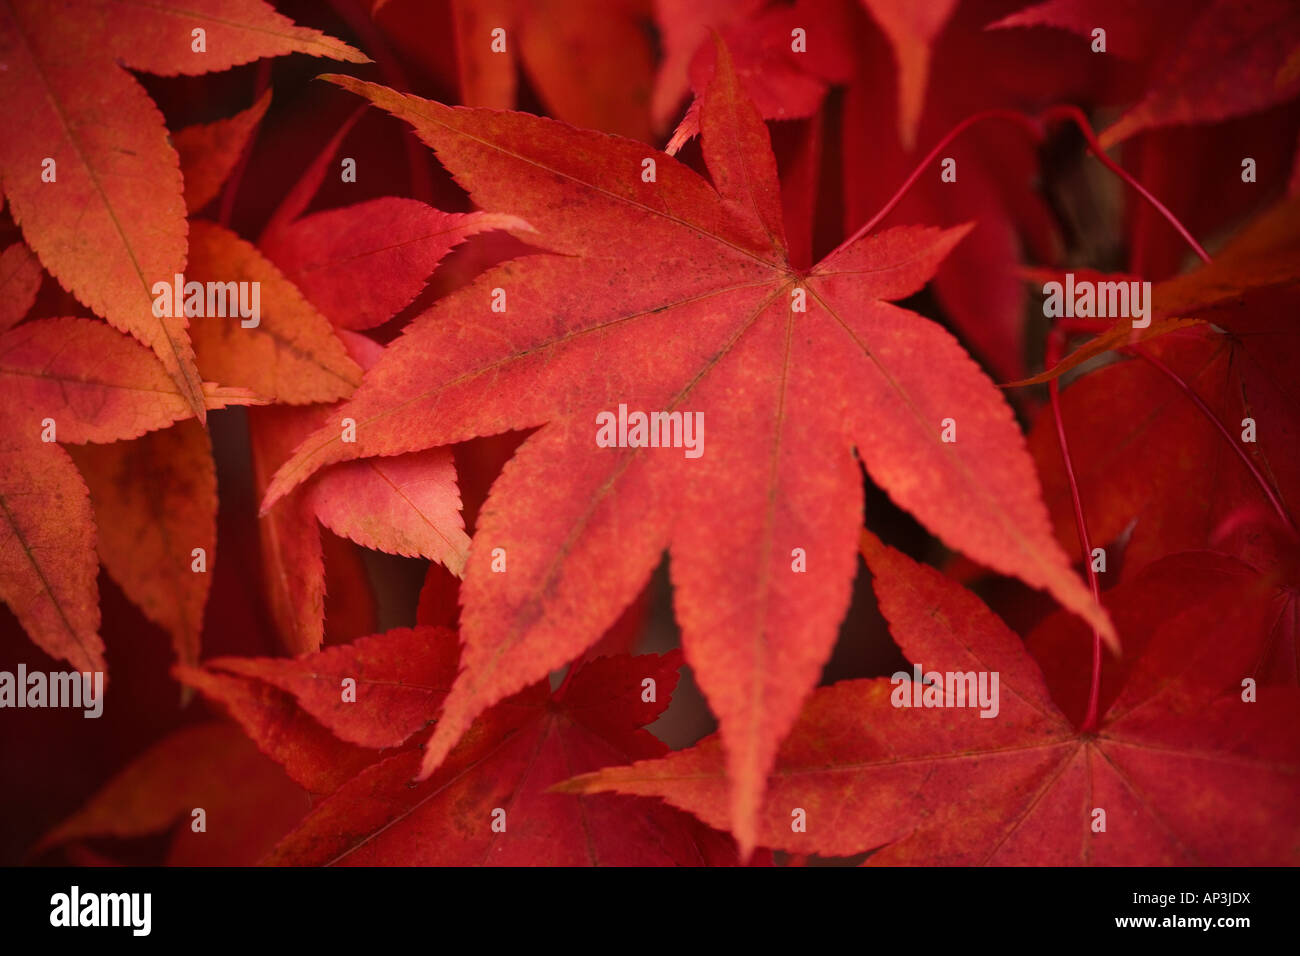 Japanese maple acer tree in detail Stock Photo